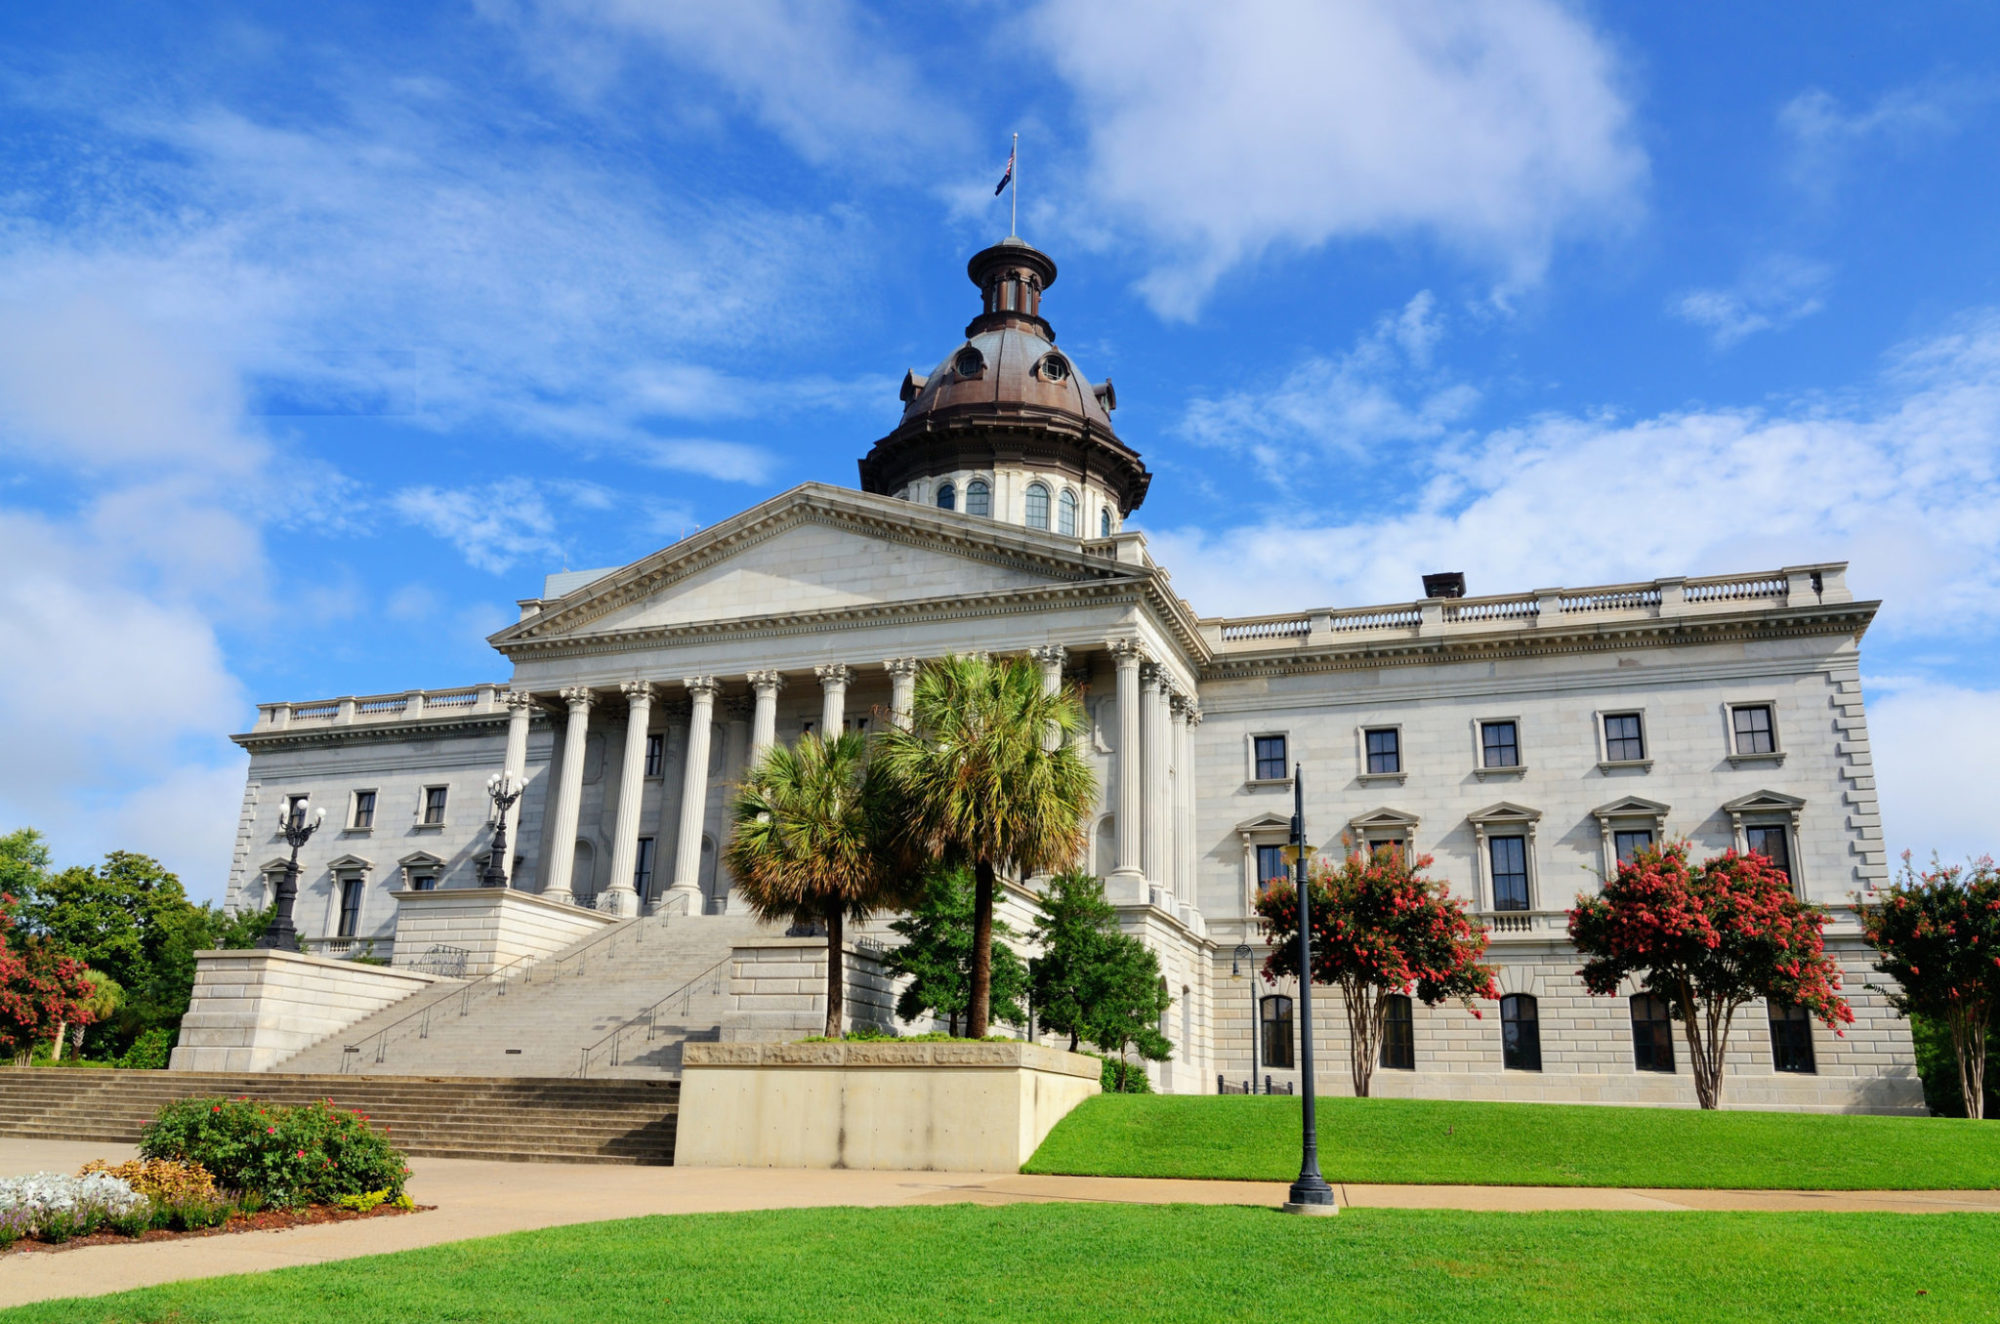 South Carolina small cities, towns to get $435M in ARPA money in September